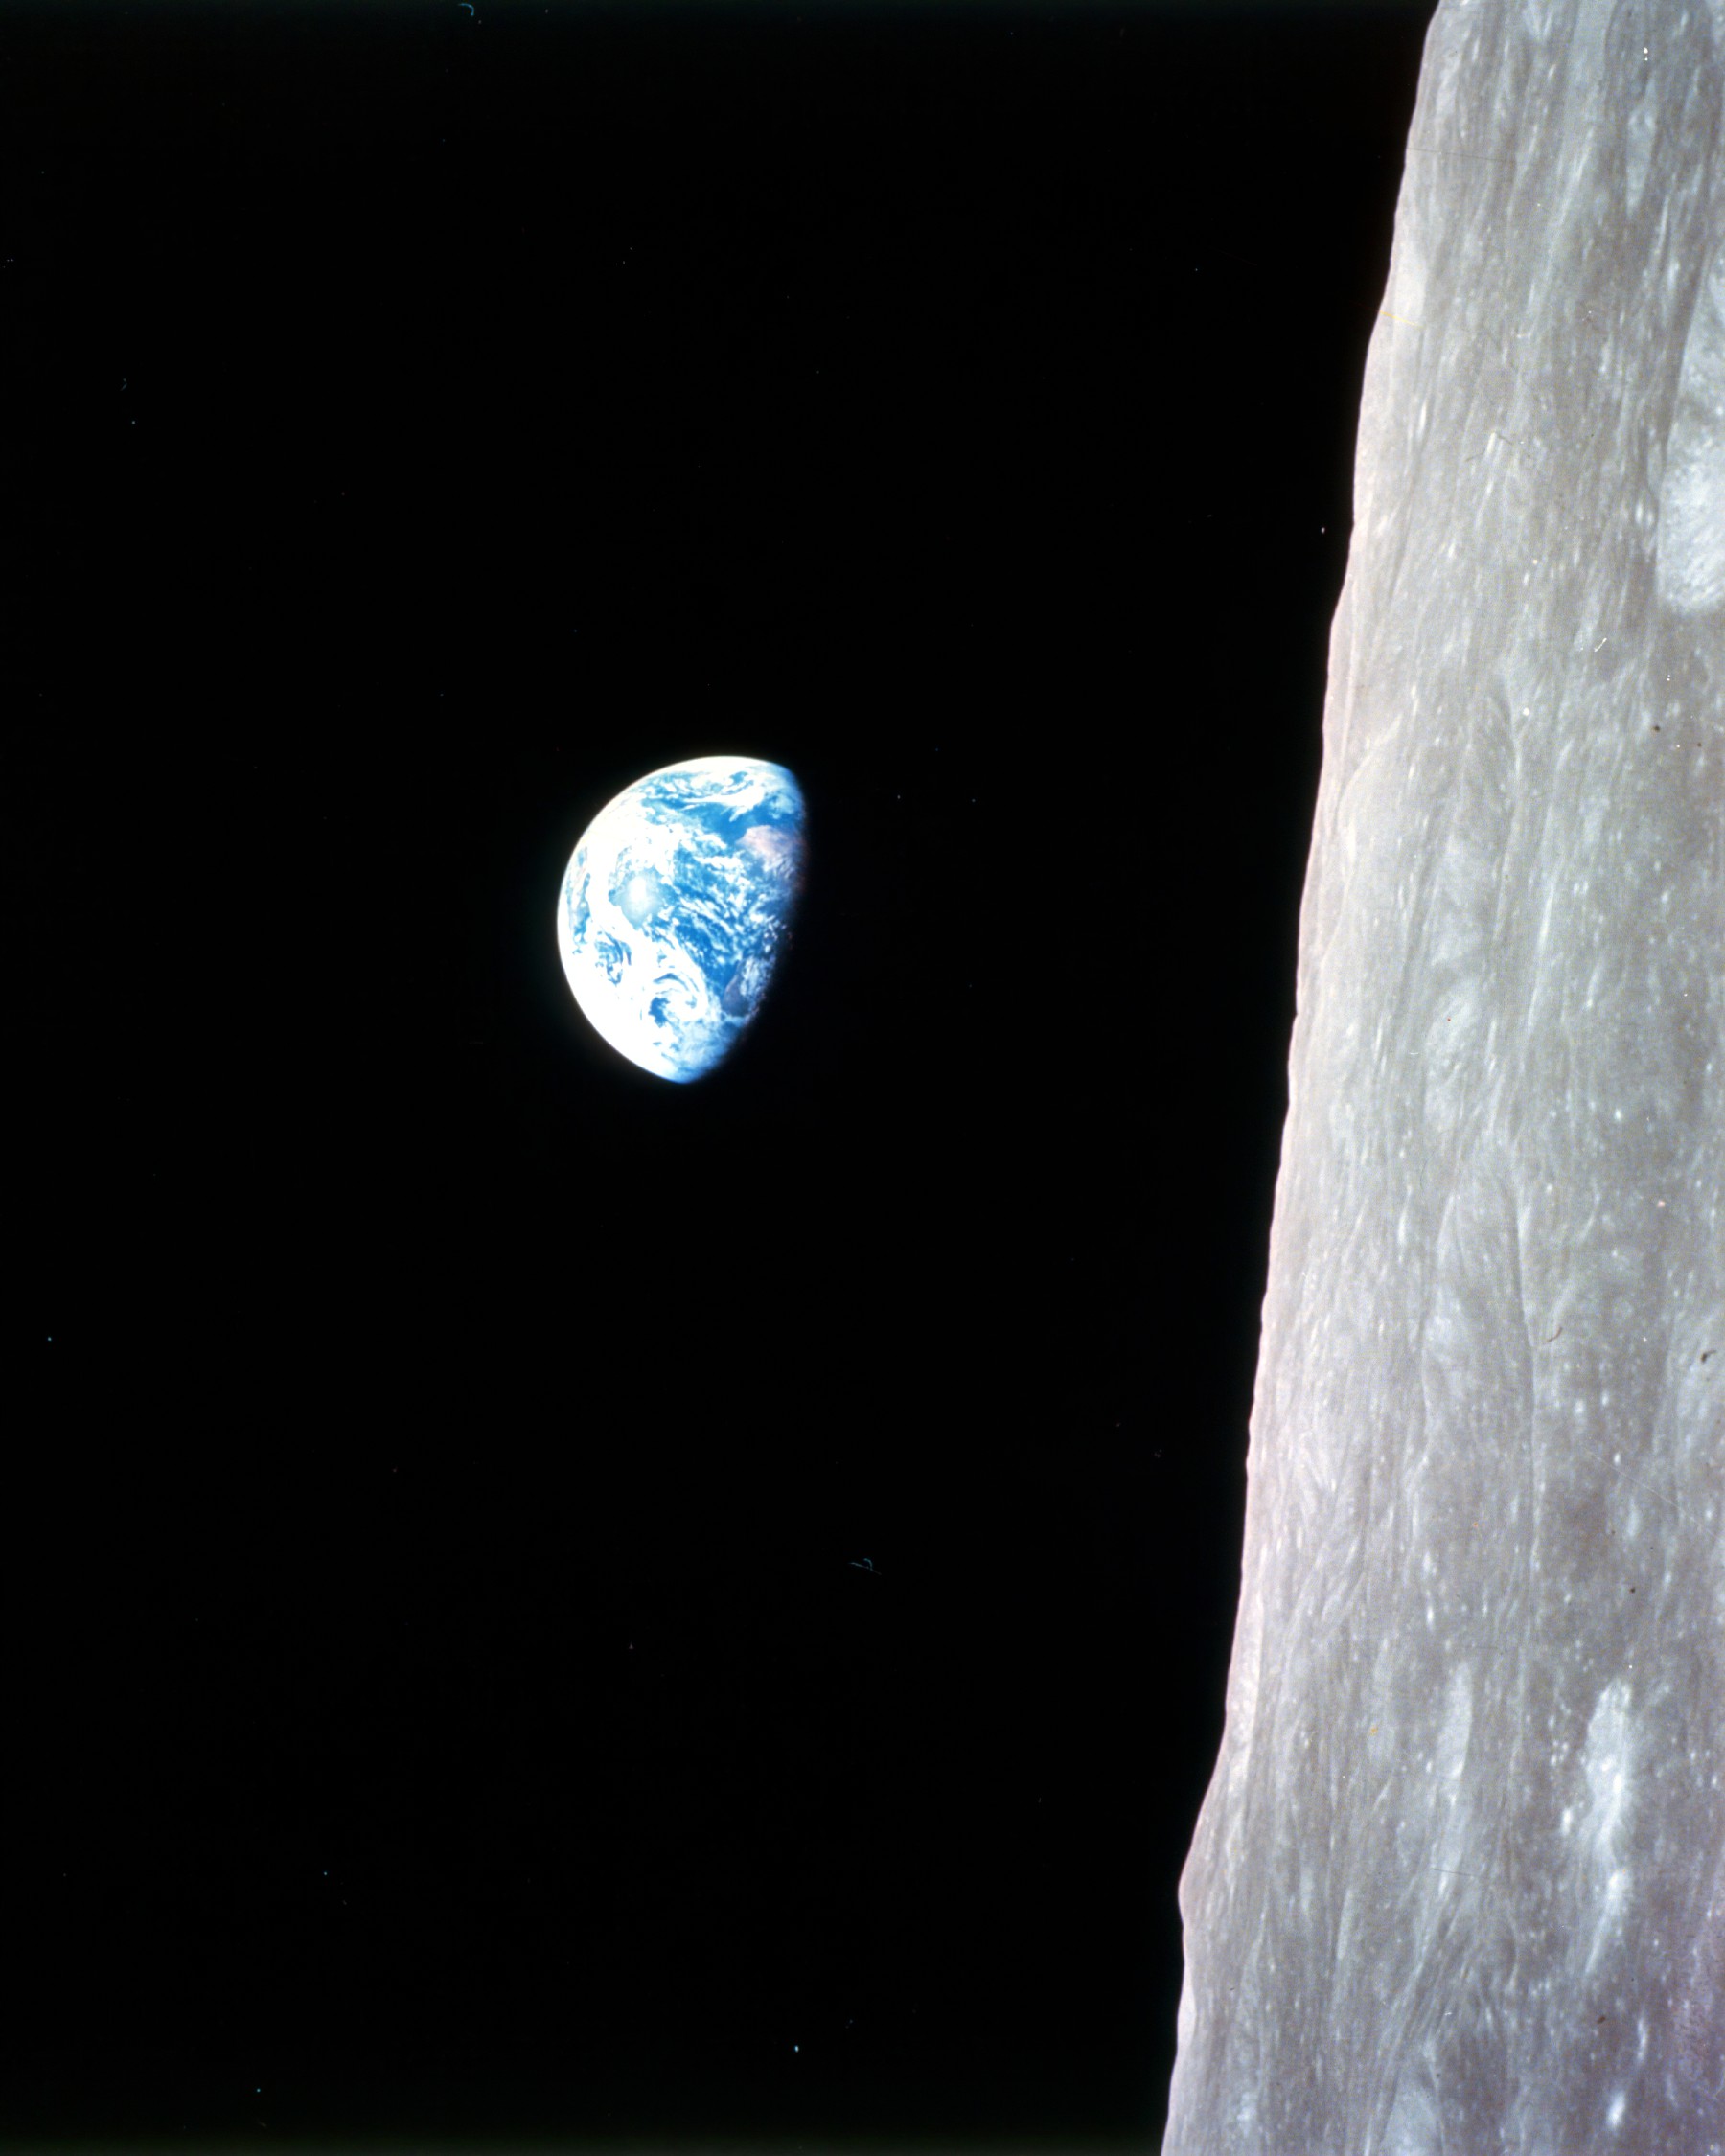 The iconic photo 'Earthrise', of the planet Earth against the blackness, with the surface of the moon in the foreground.